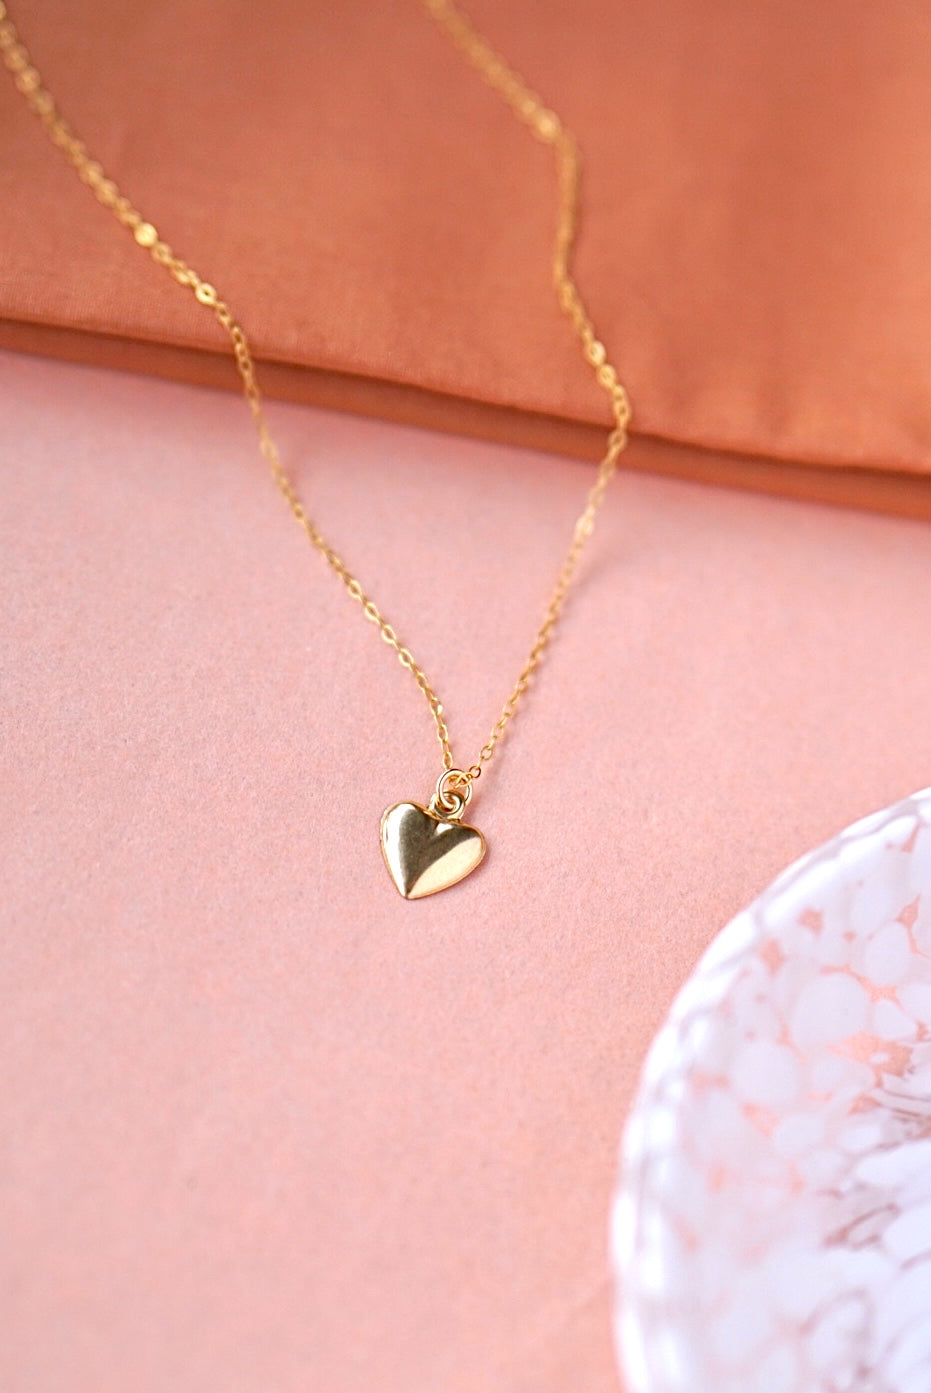 Fine necklace with pendant - golden heart (Winter edition)